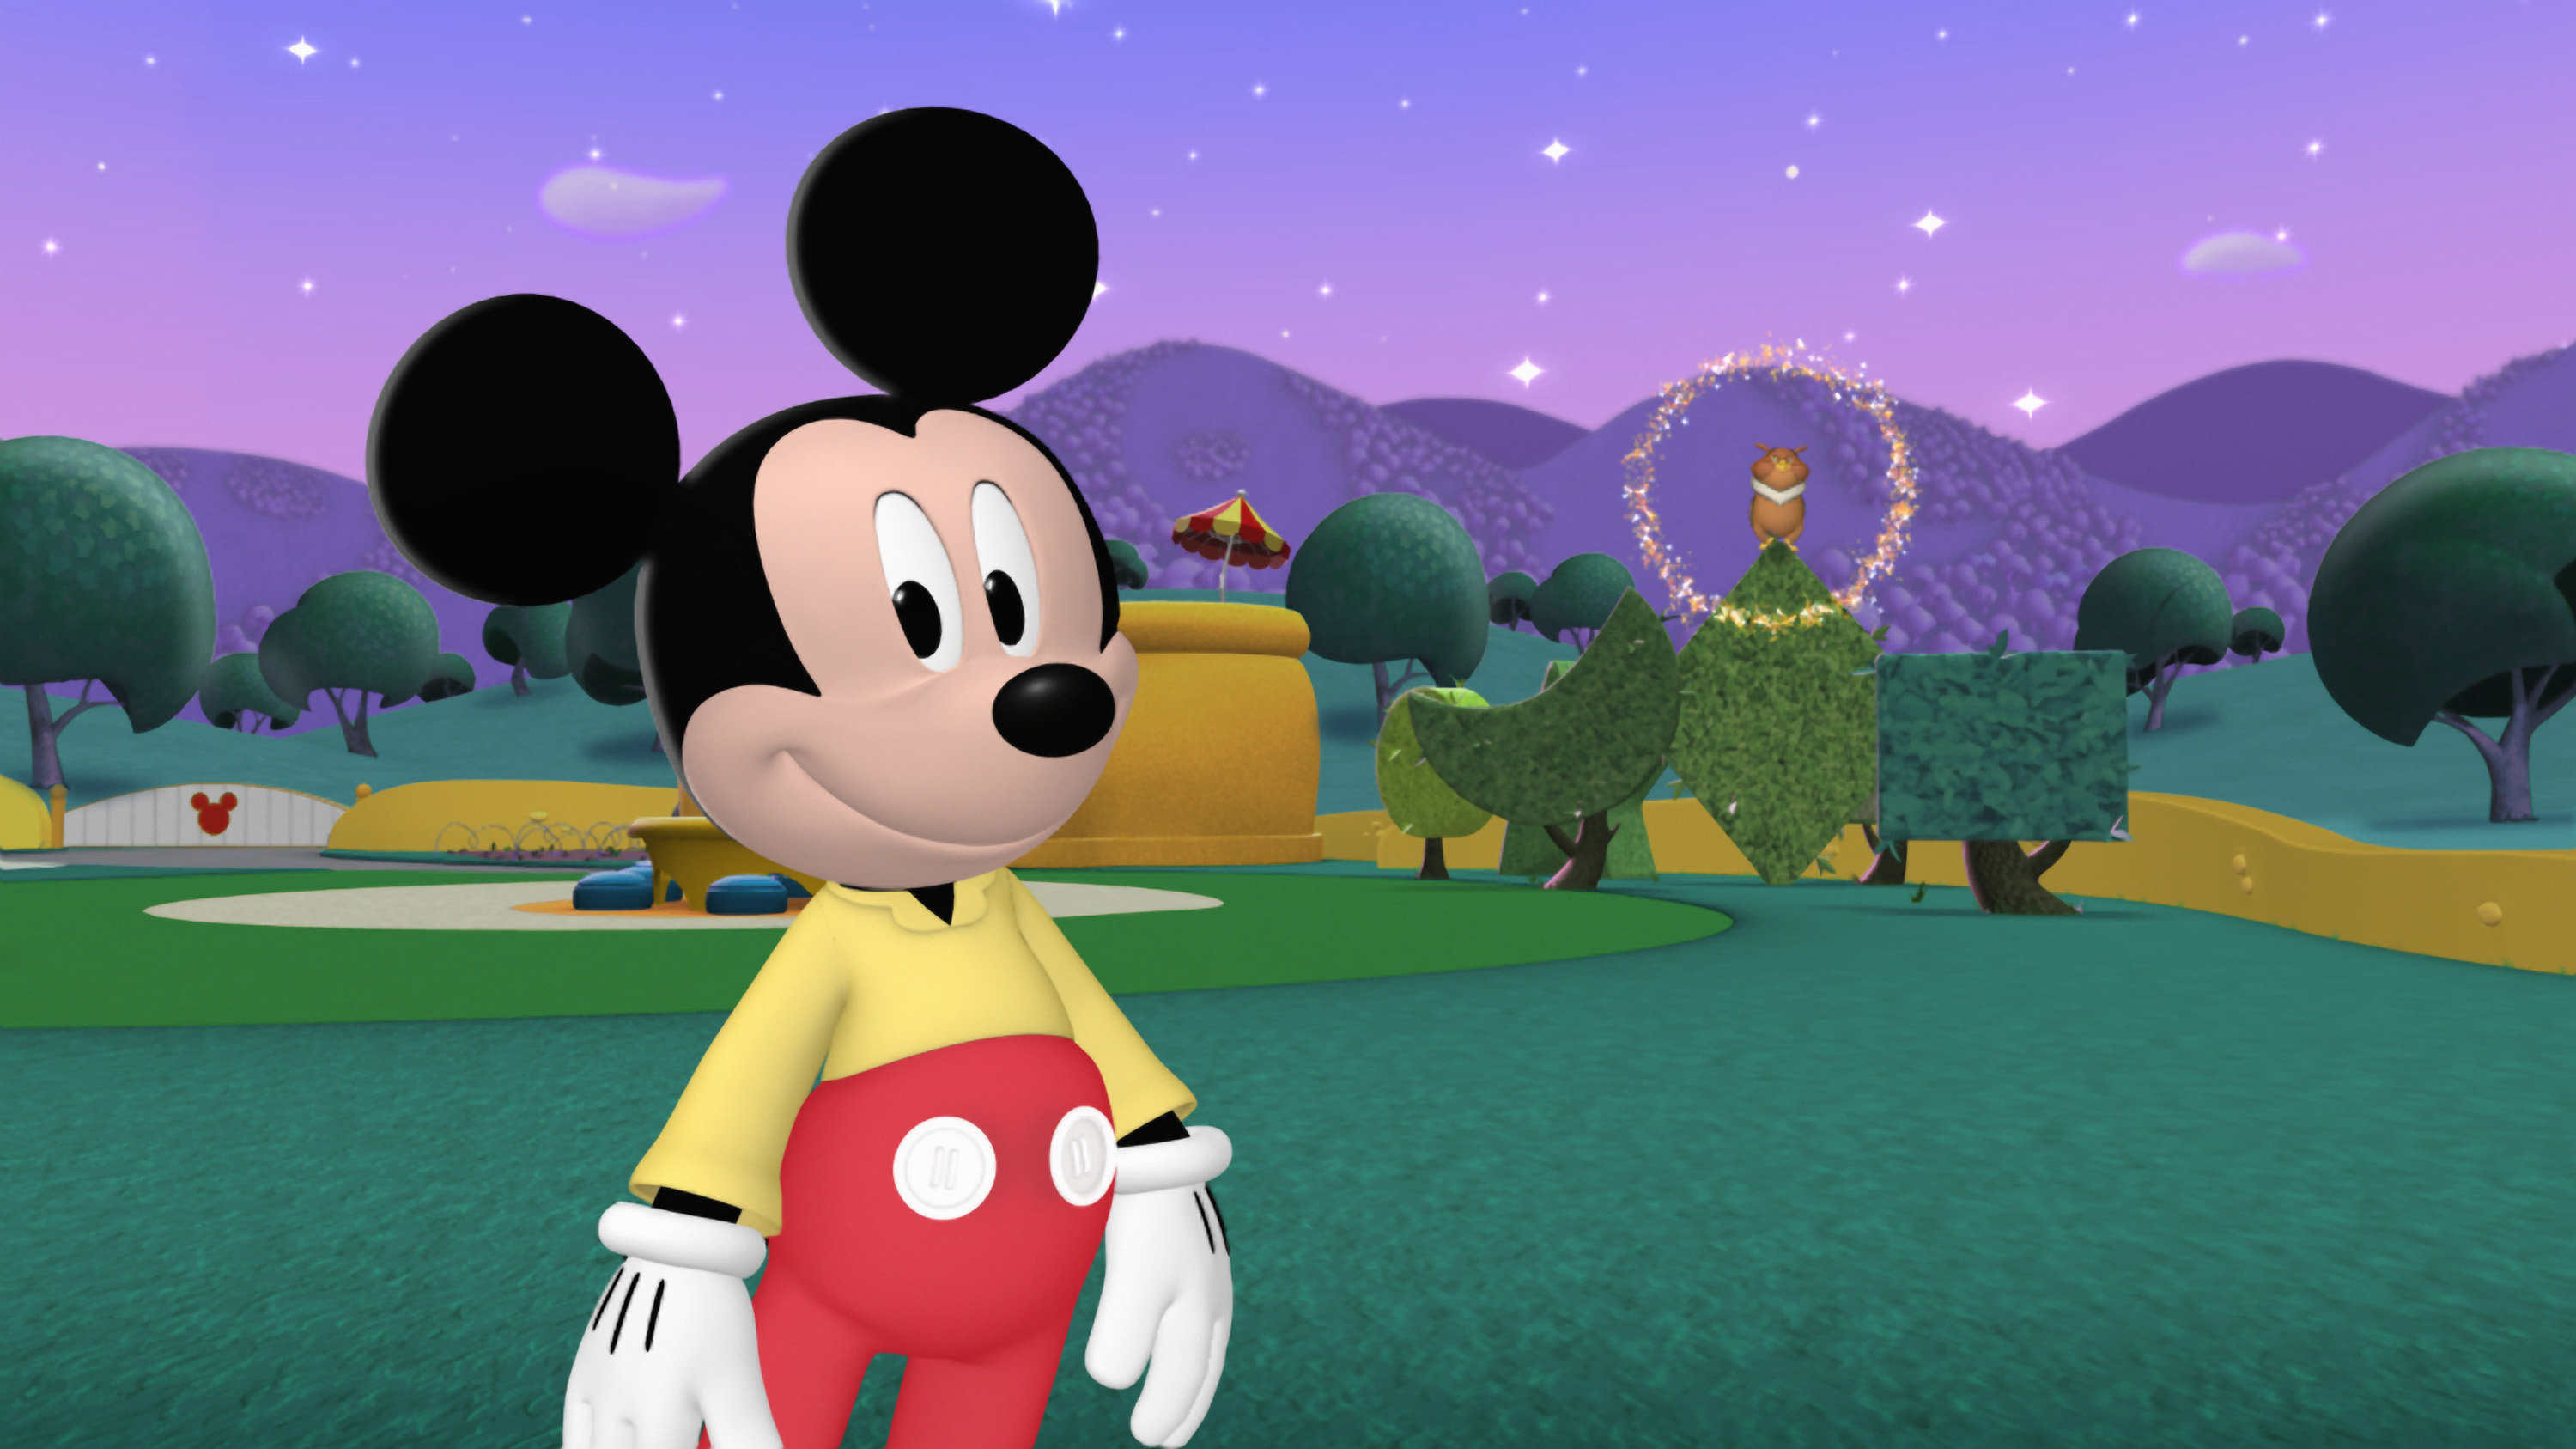 Mickey Mouse Clubhouse Wallpapers High Quality | Download Free